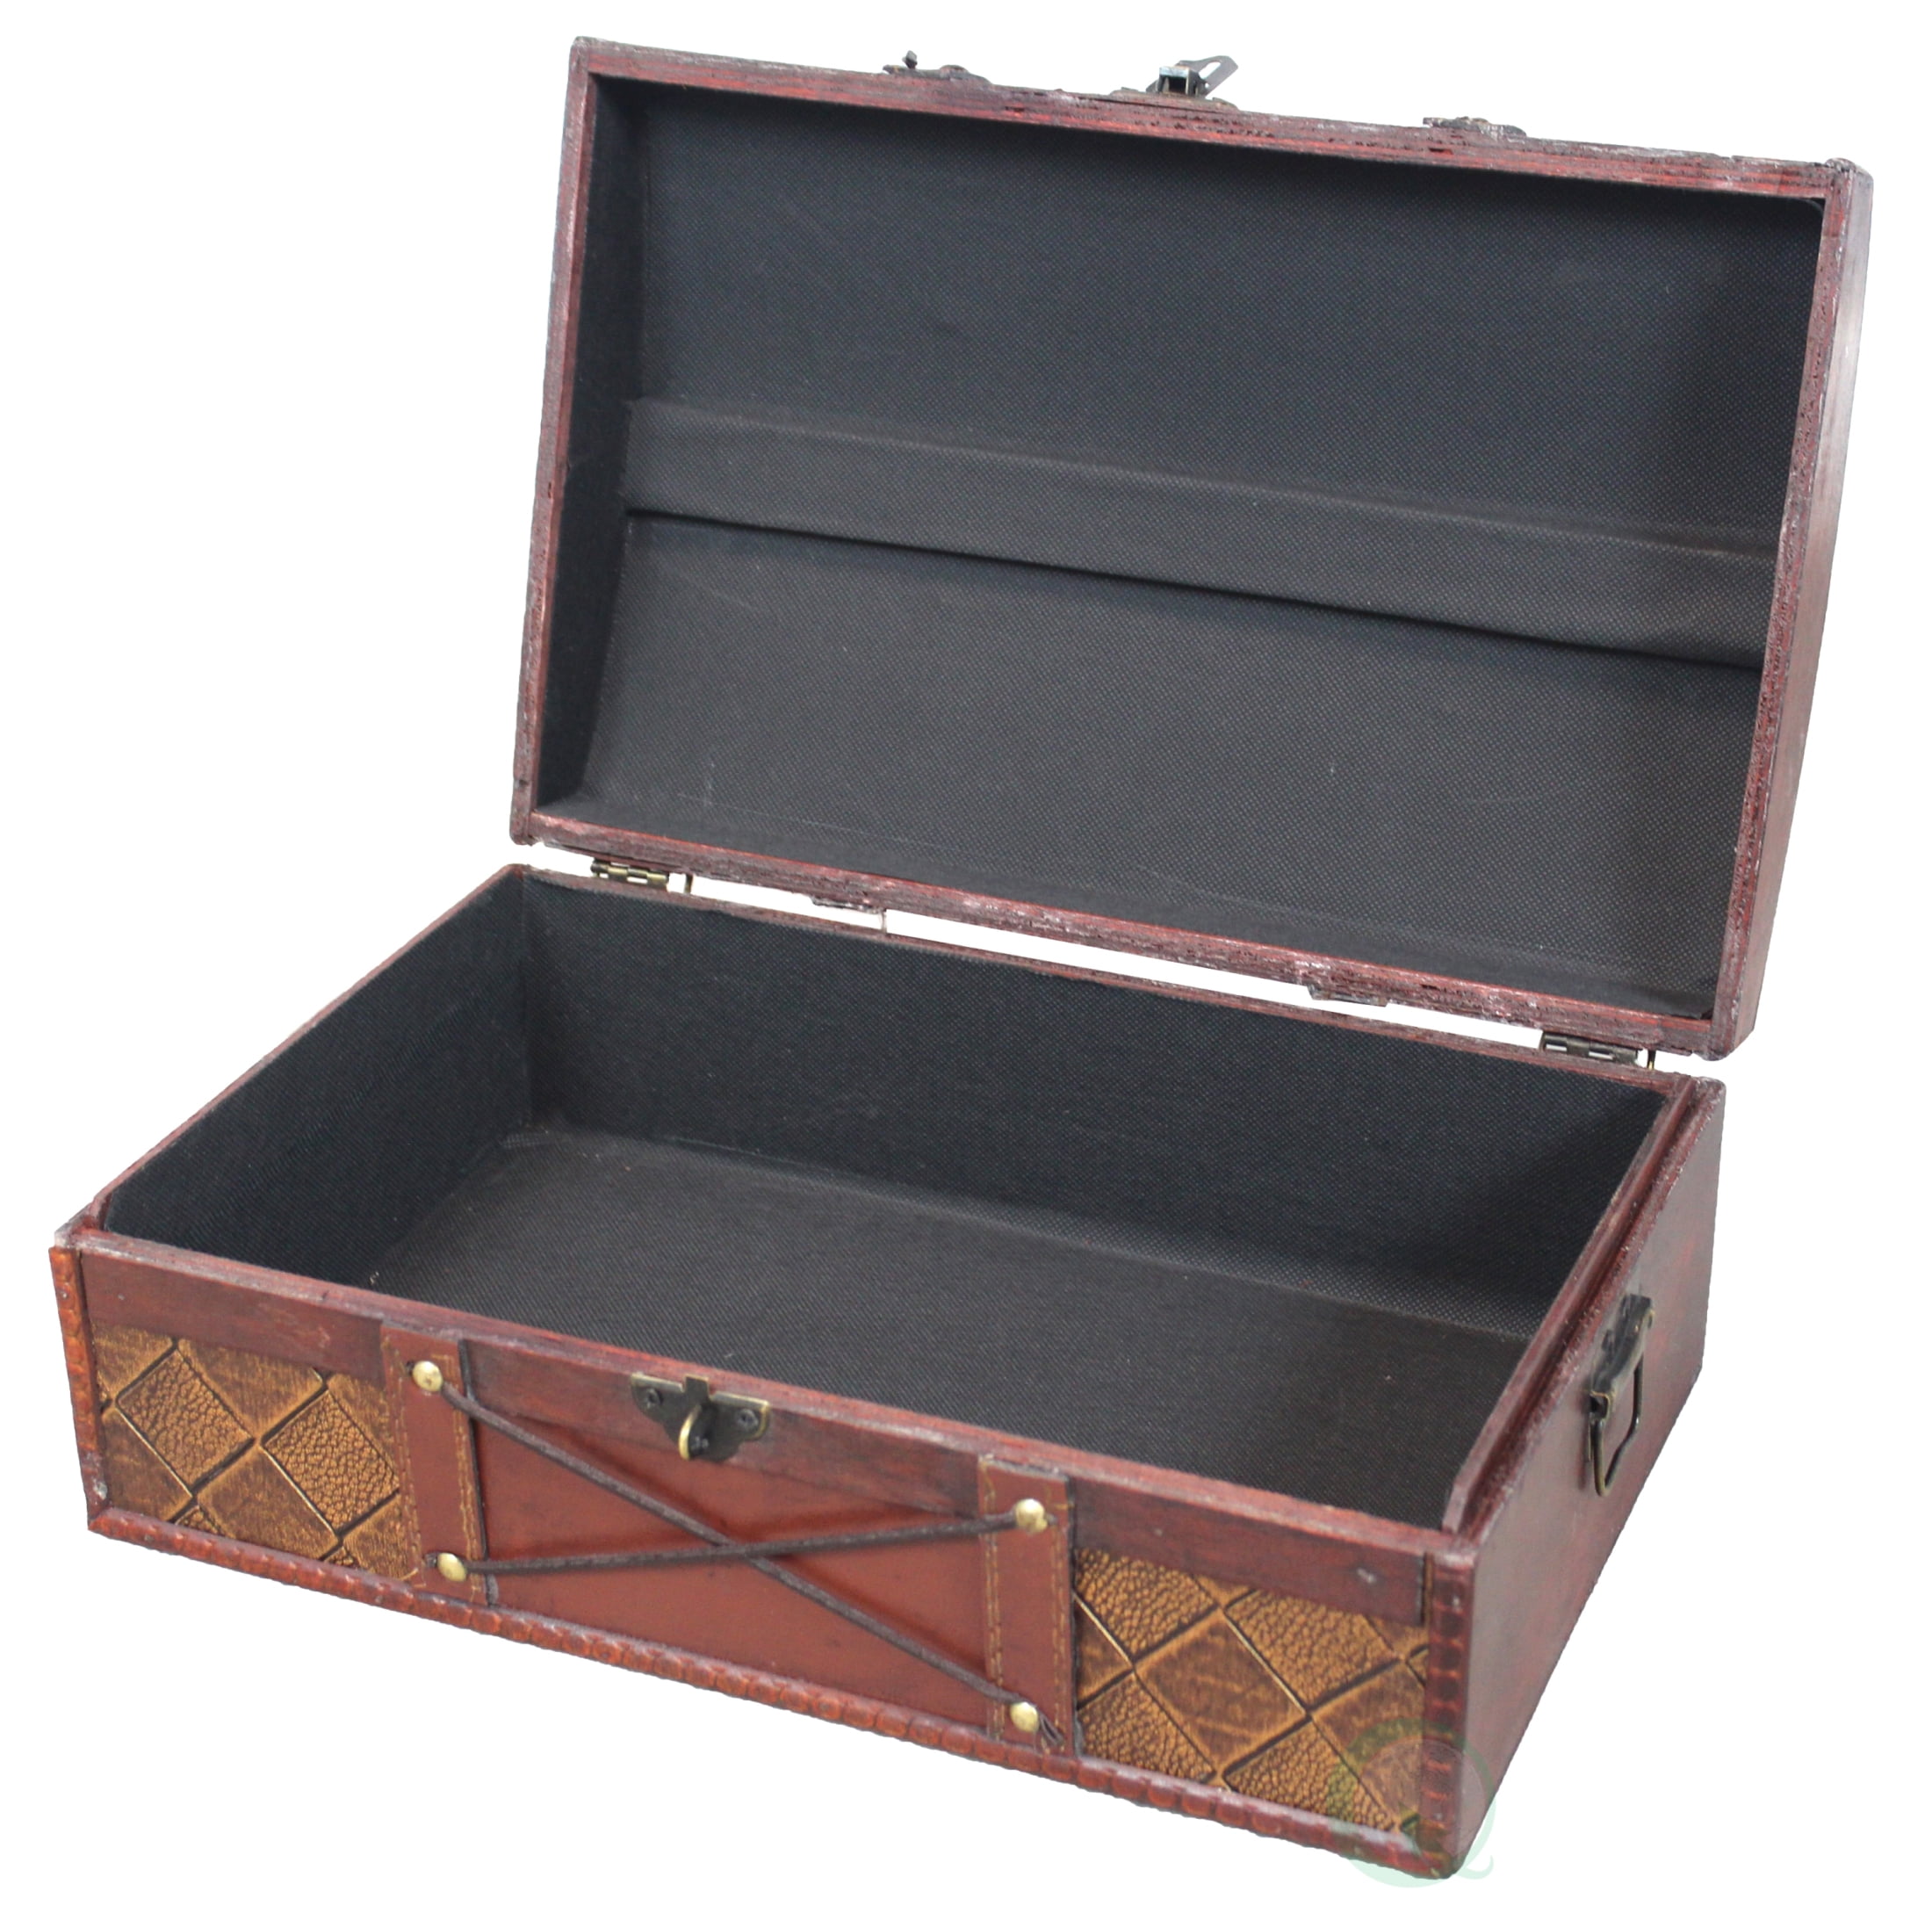 New Vintiquewise Antique Style Wood and Leather Trunk with Round Top QI003010 